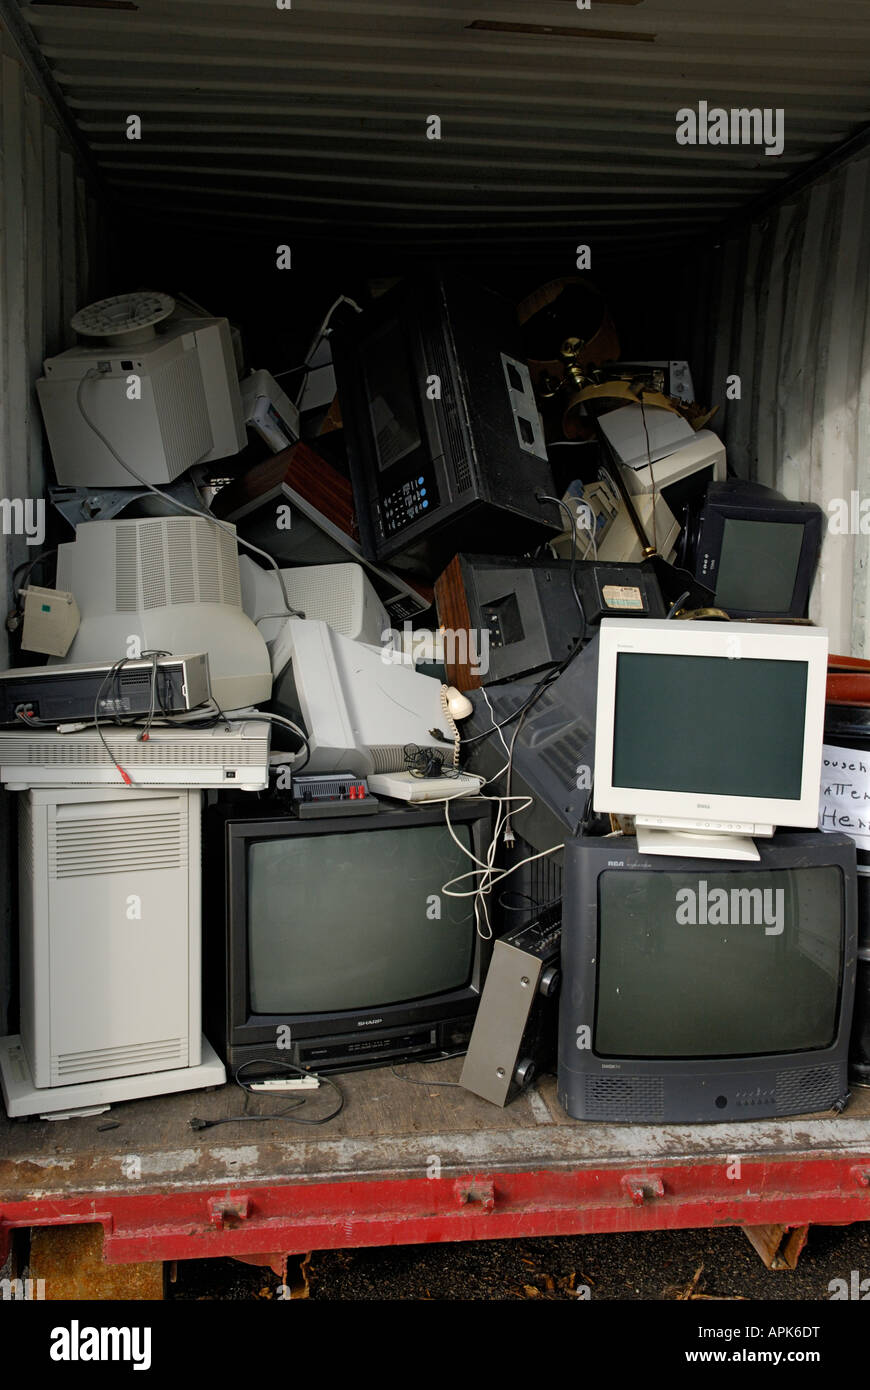 An electronics e waste recycling collection area The collection is part of a municipal recycling center in Ringwood NJ Stock Photo